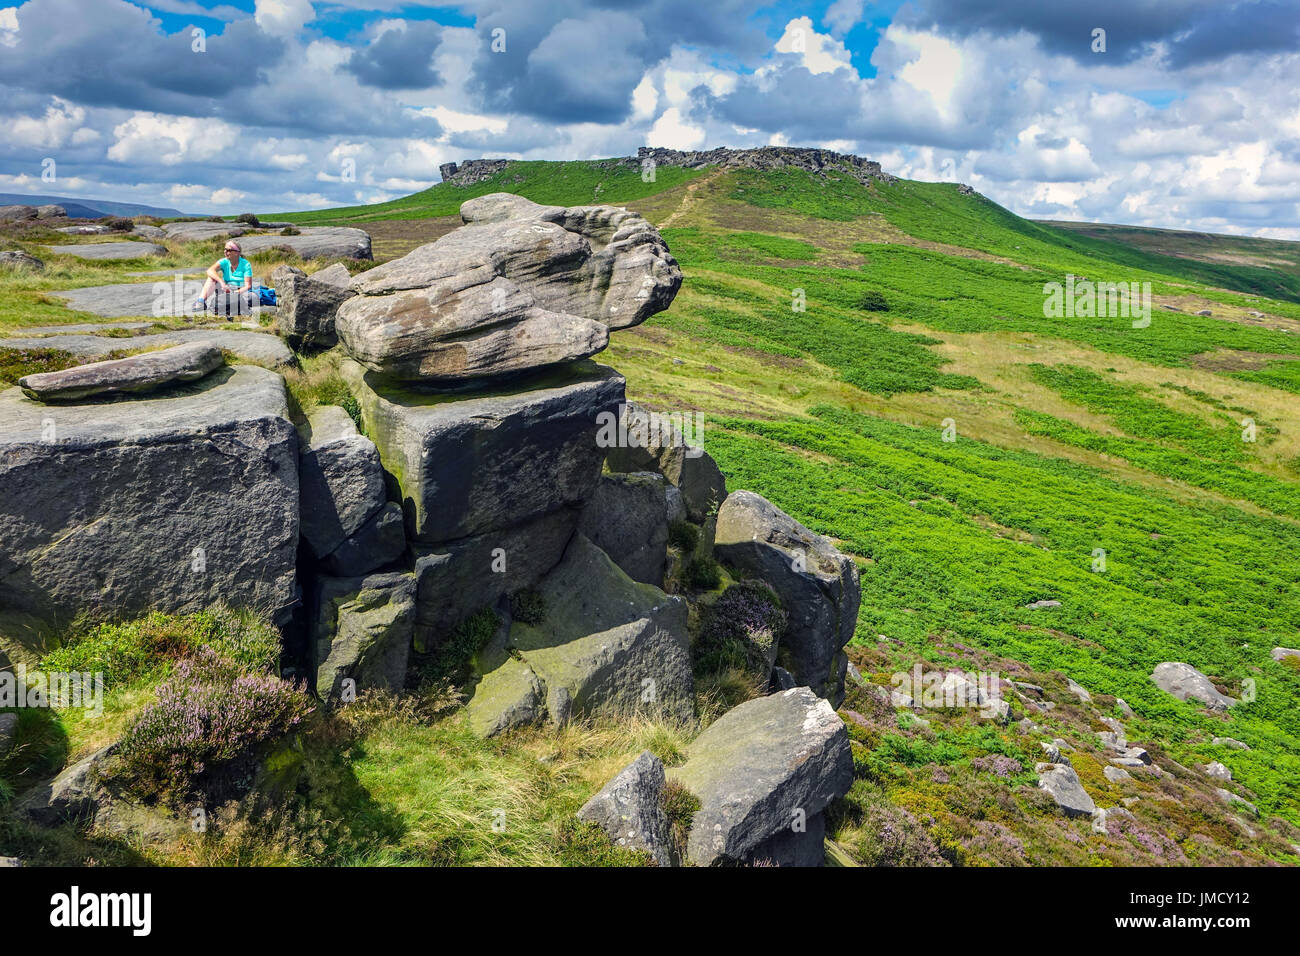 Burbage Valley, Carl Wark, Higgar Tor with summer clouds Stock Photo